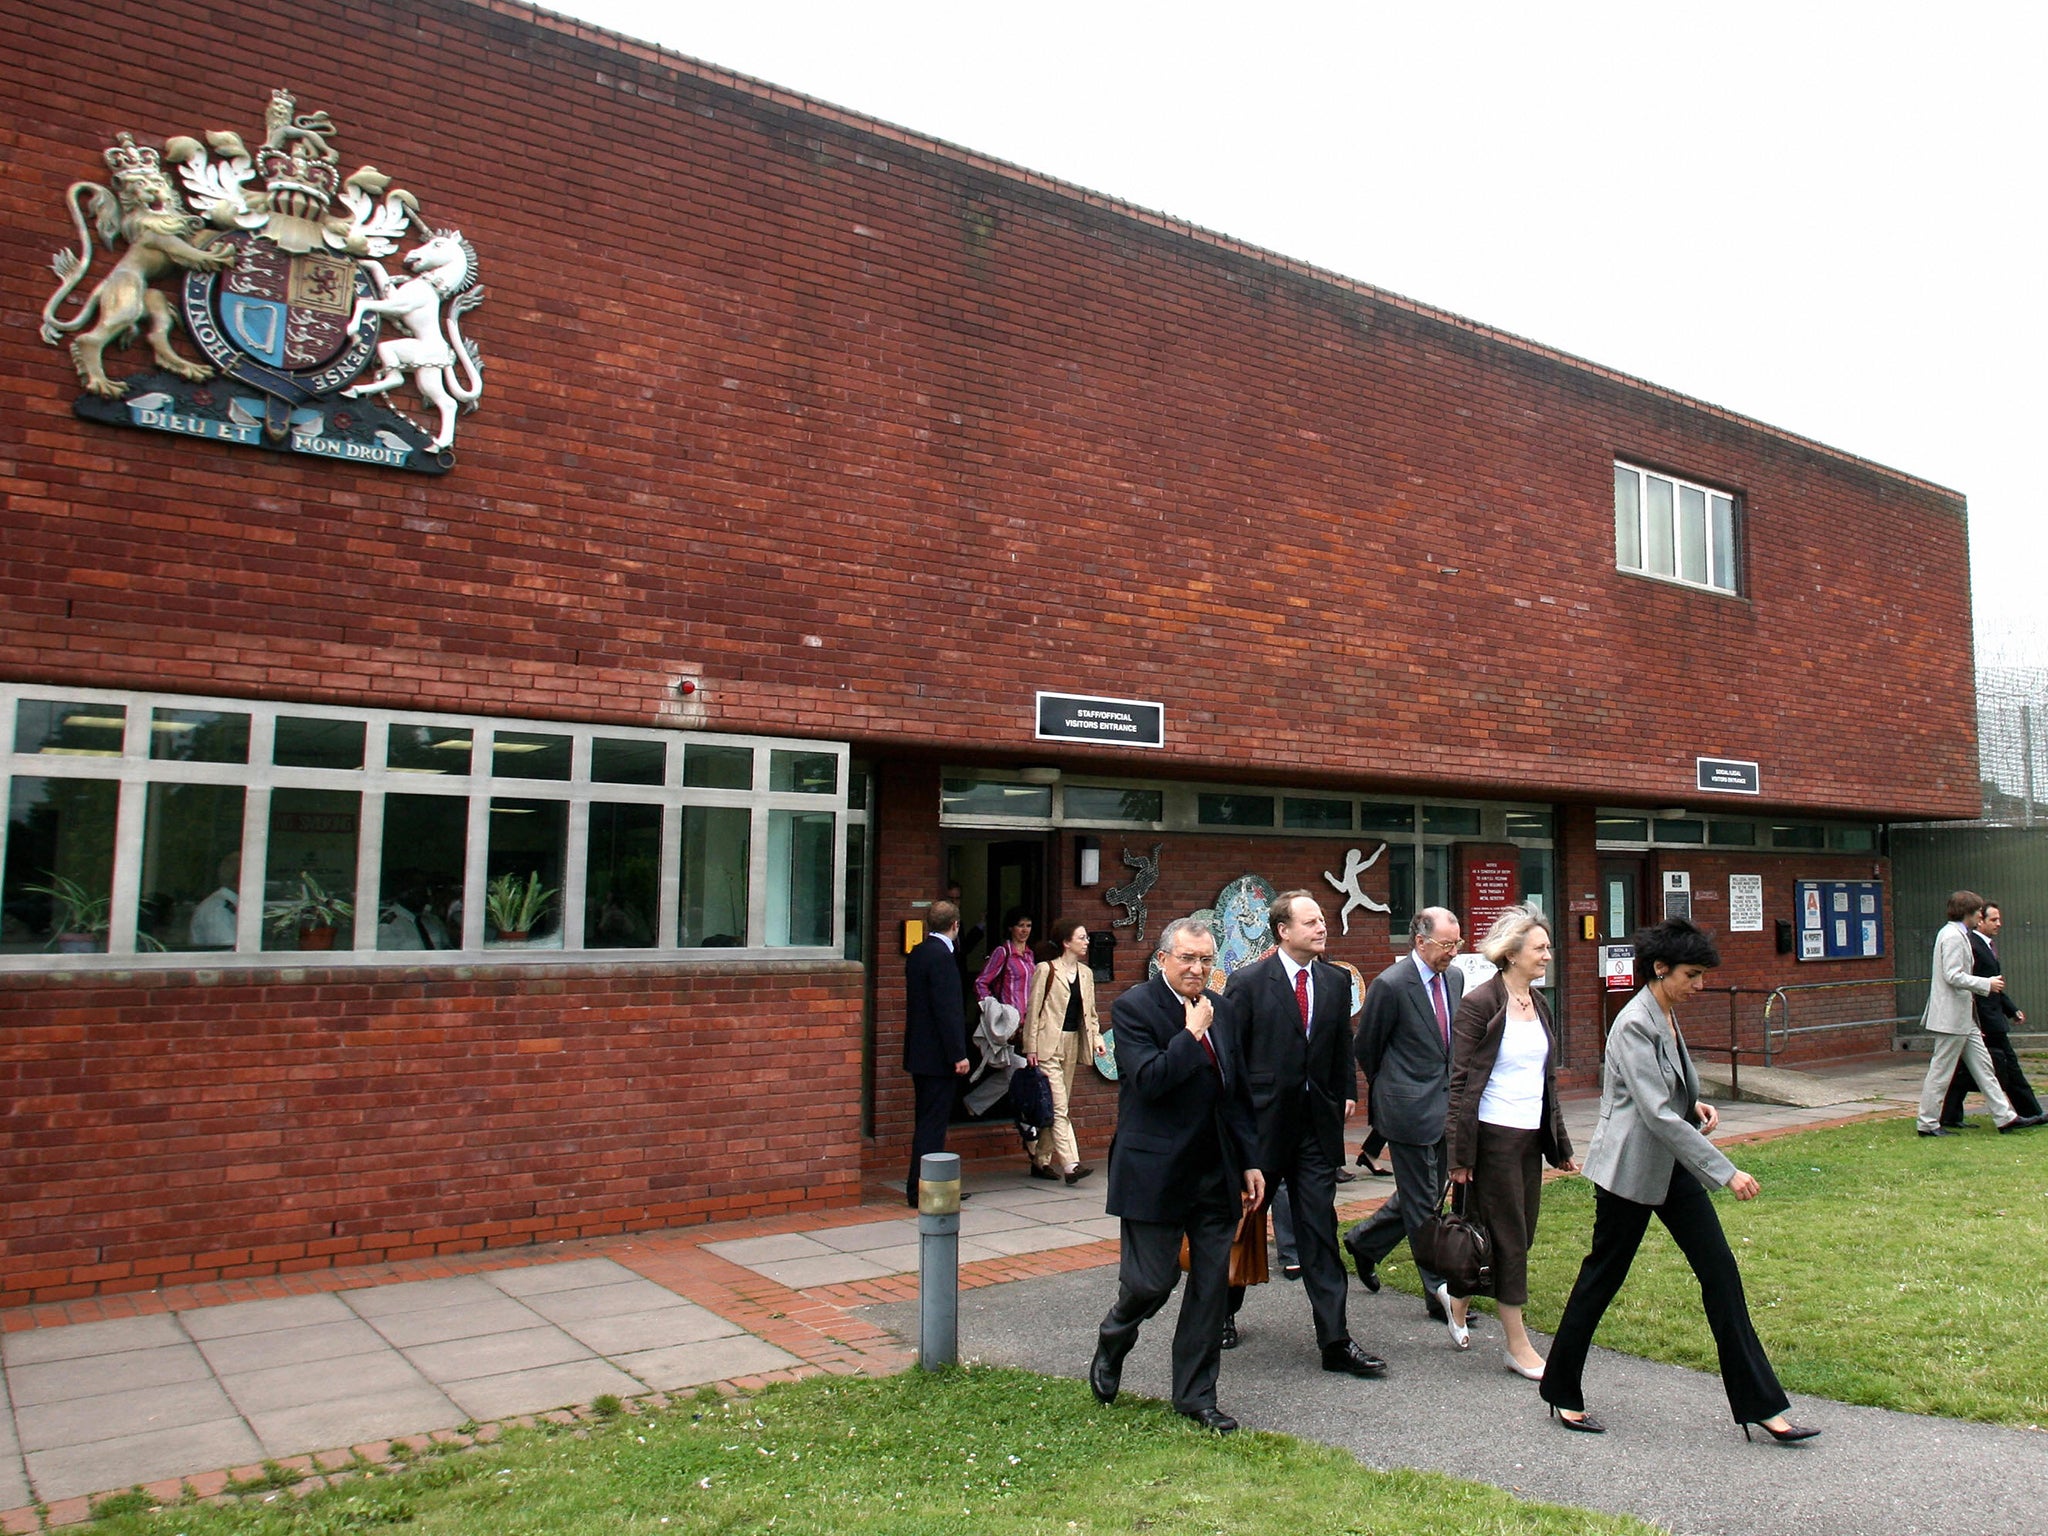 YOI Feltham is one of five young offender institutions across England and Wales